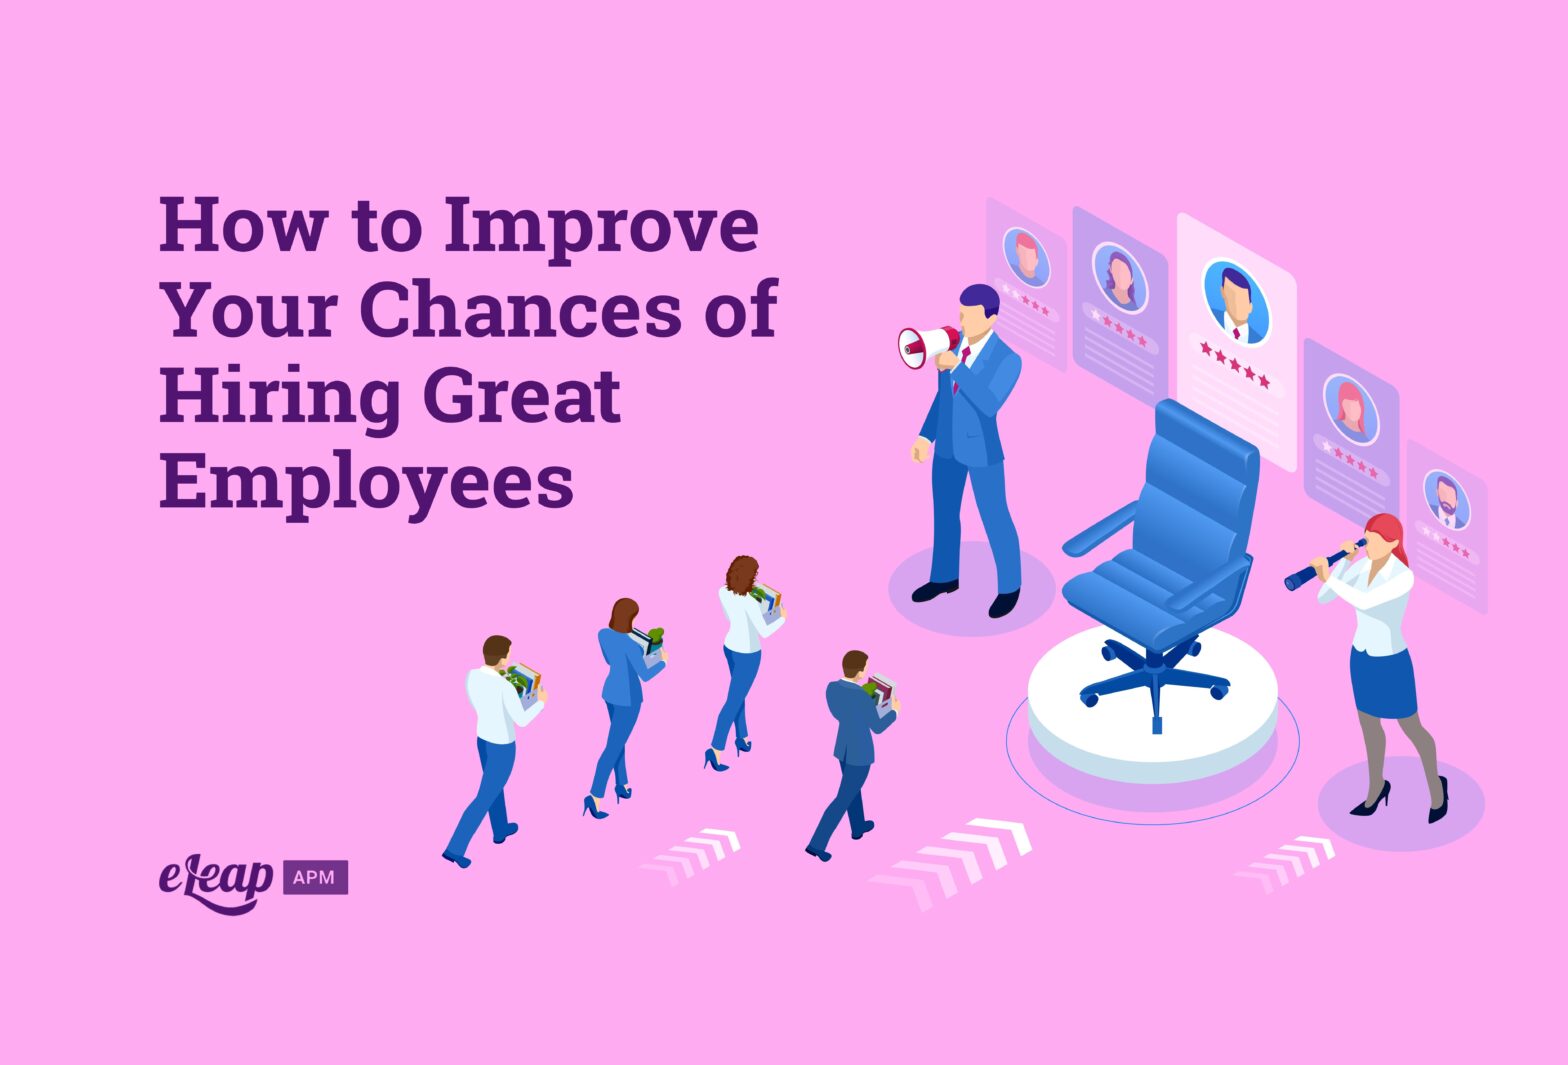 How to Improve Your Chances of Hiring Great Employees